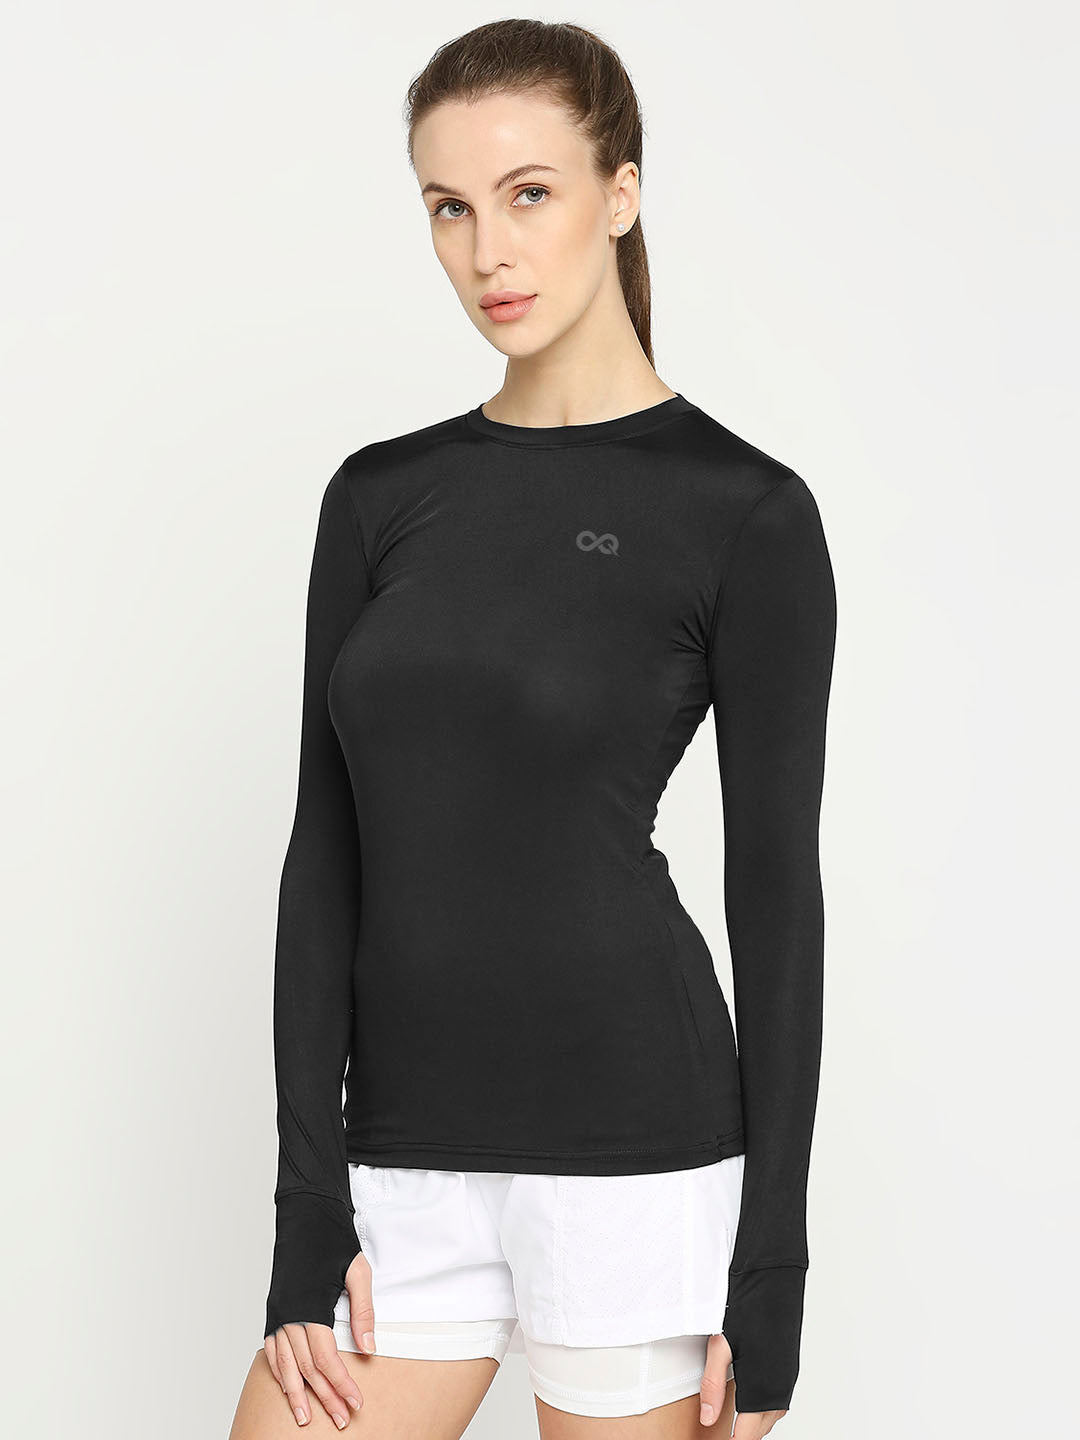 Women's Black Long Sleeve Sports T-Shirt - Stay Stylish and Comfortable